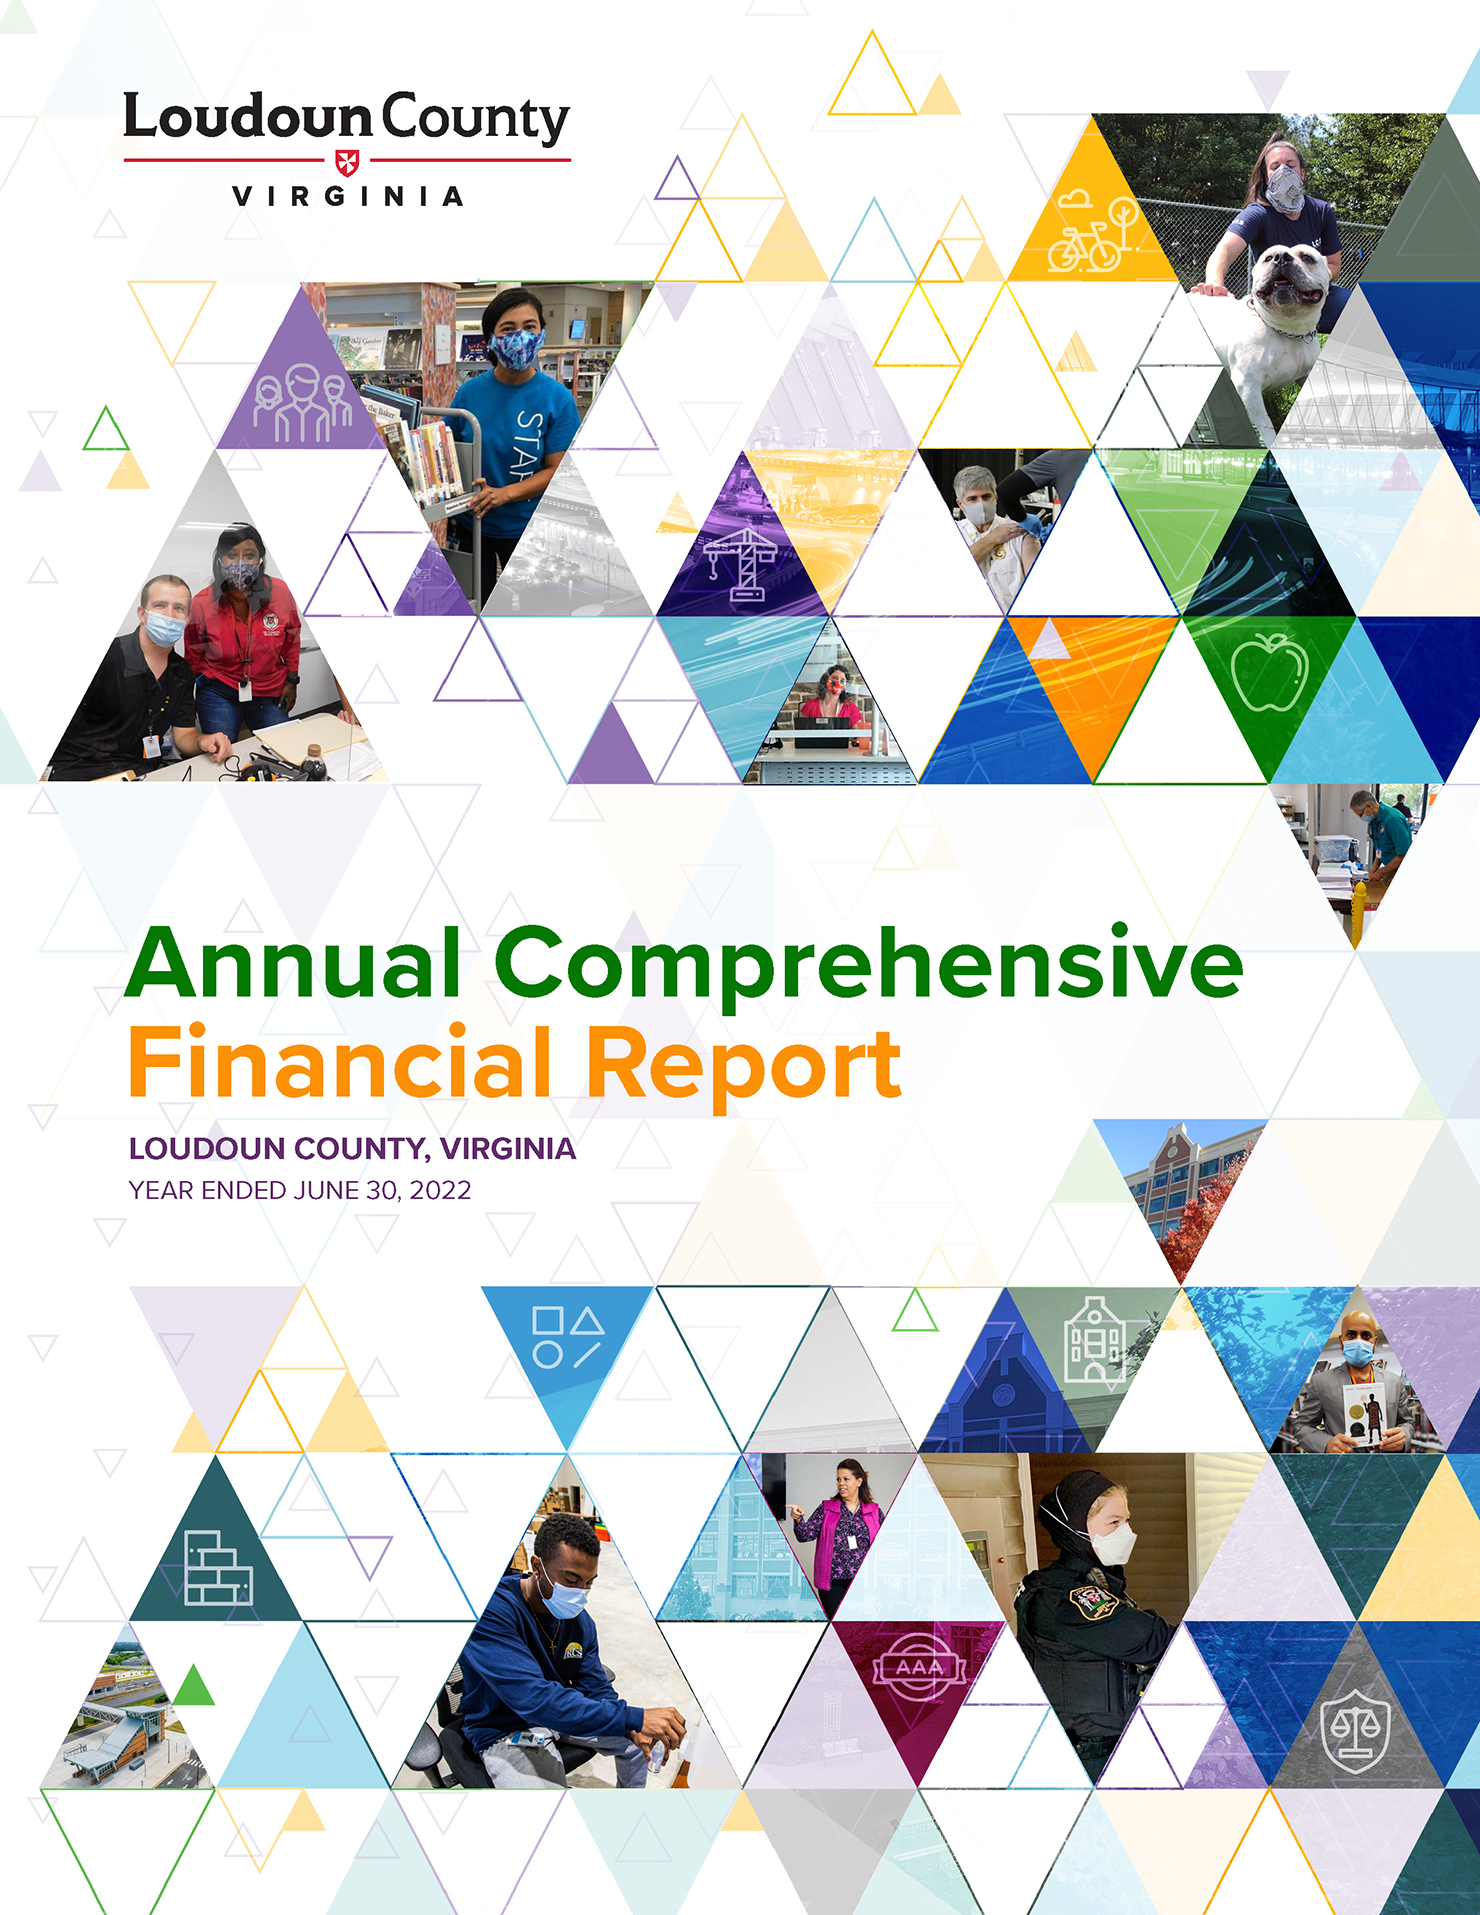 Link to Fiscal Year 2022 Annual Comprehensive Financial Report